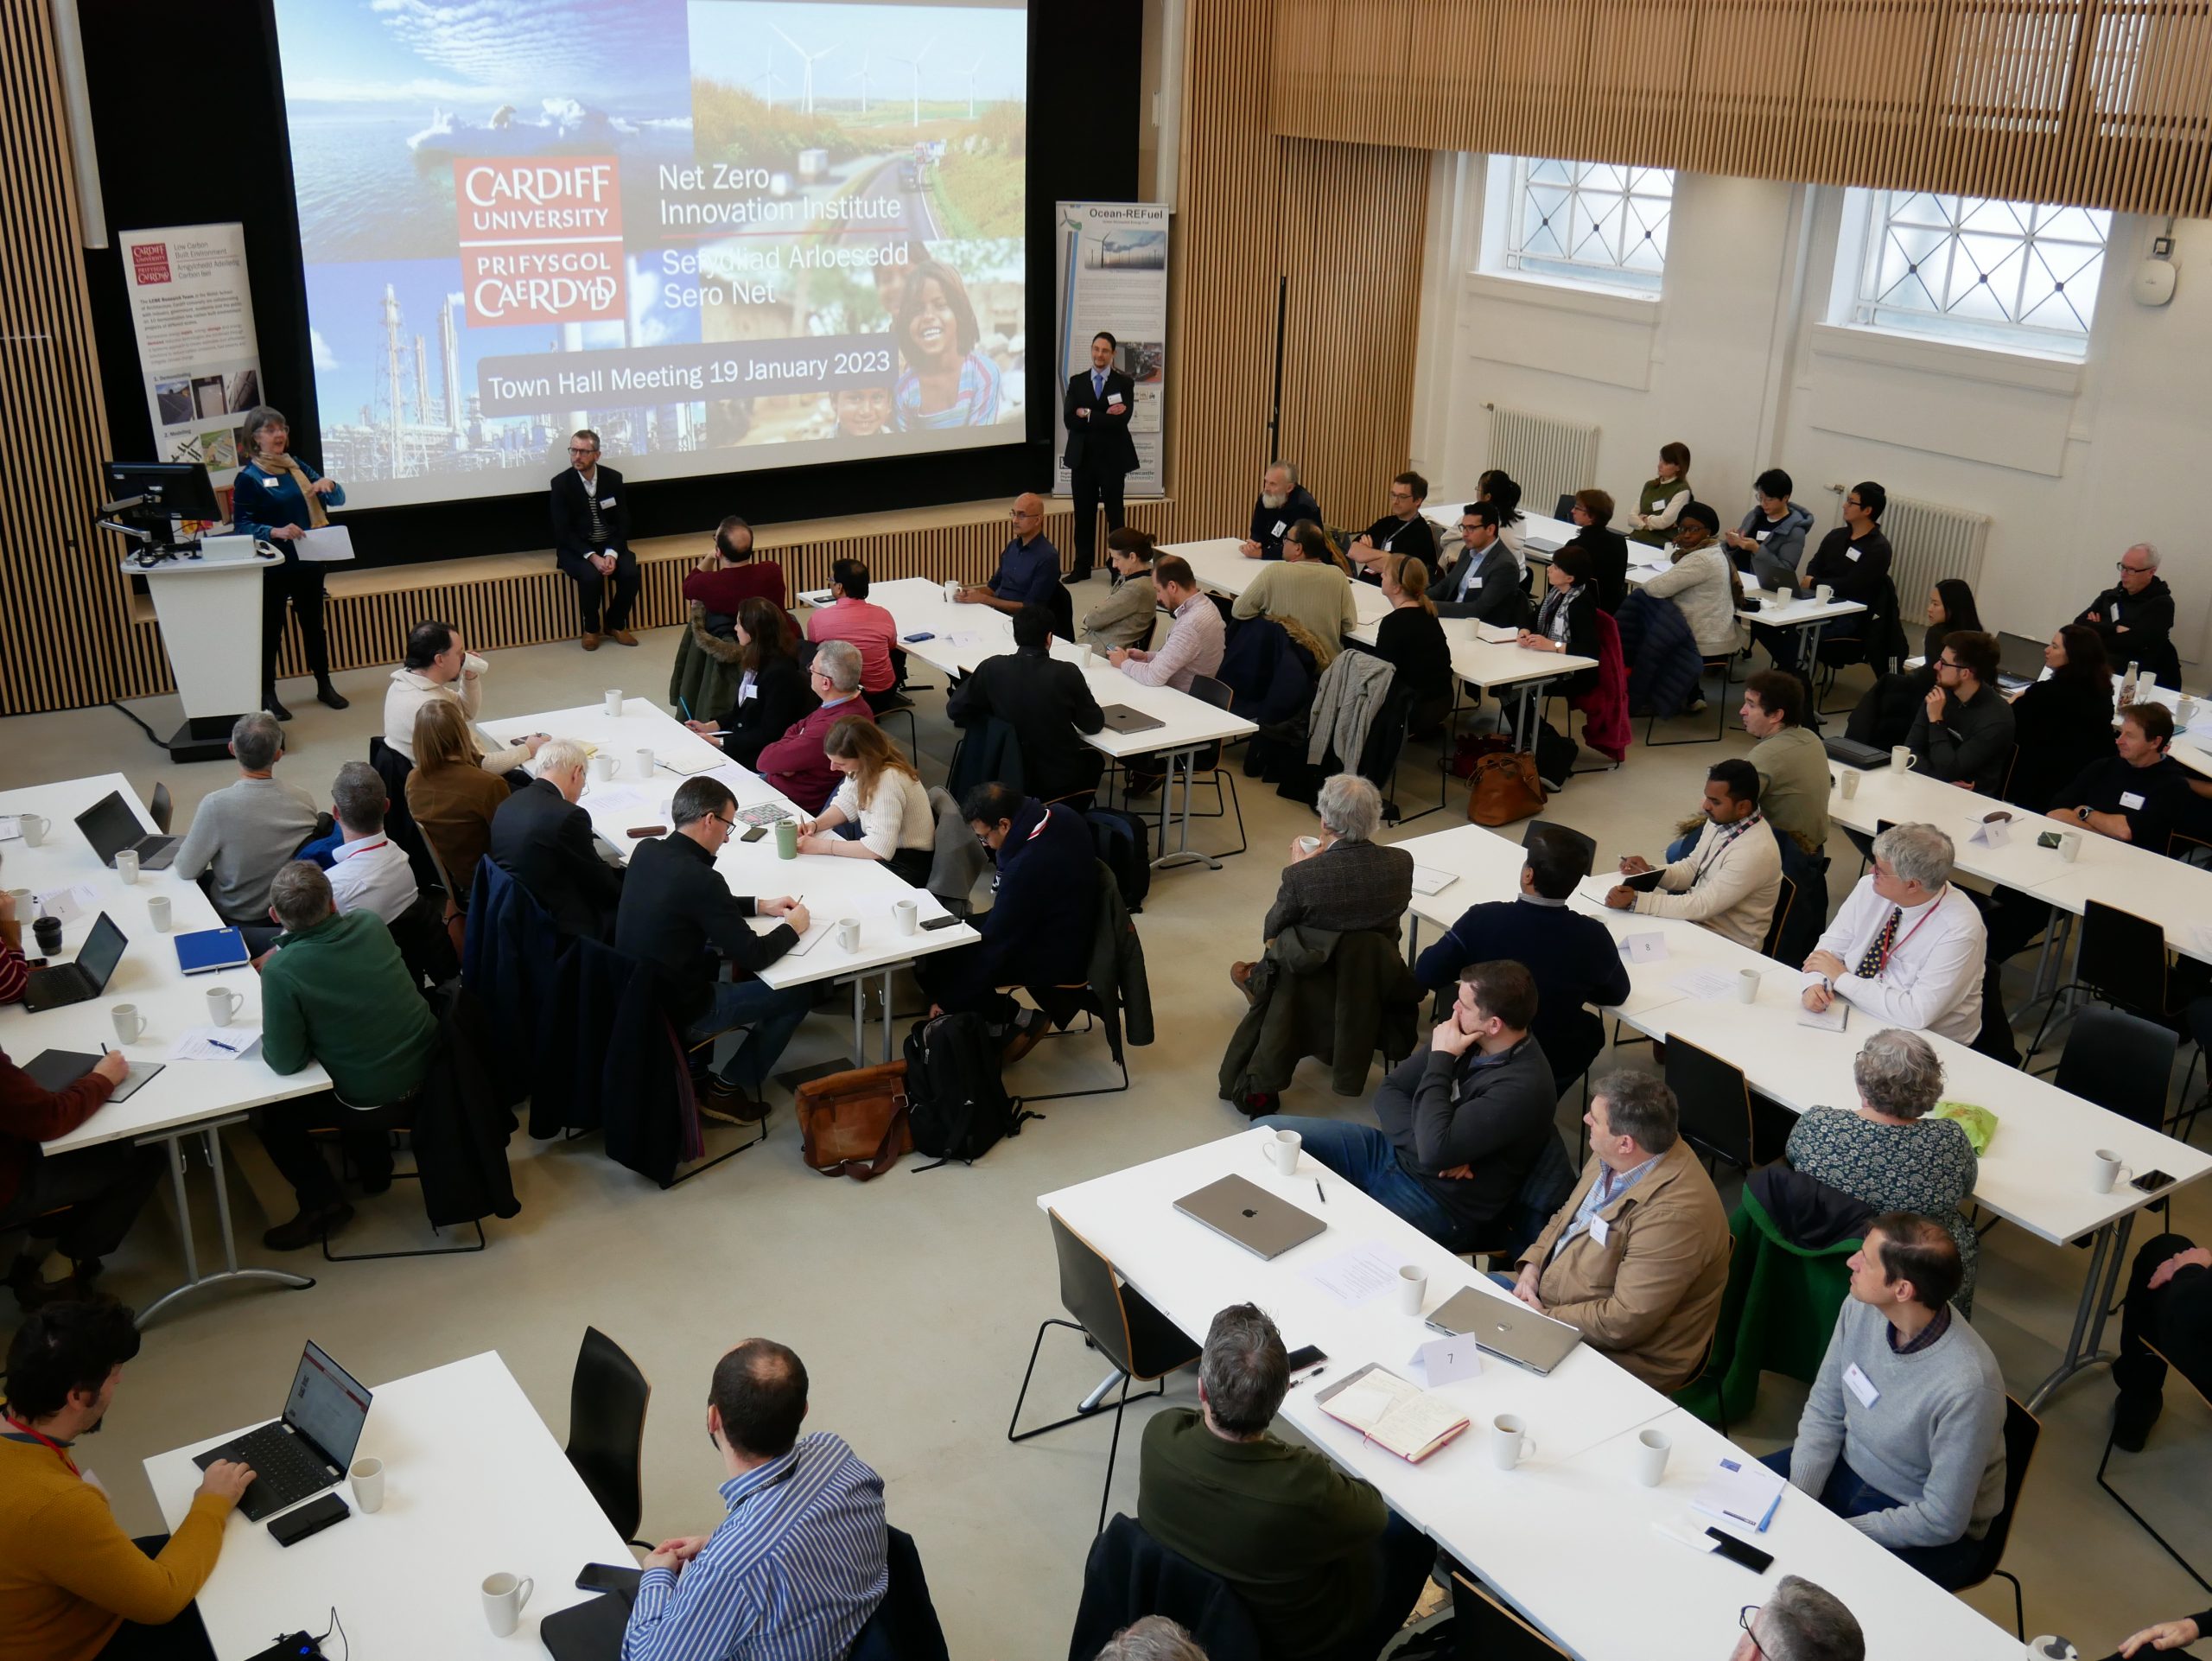 Photo shows a room of people attending a Net Zero Innovation Institute Town Hall event.